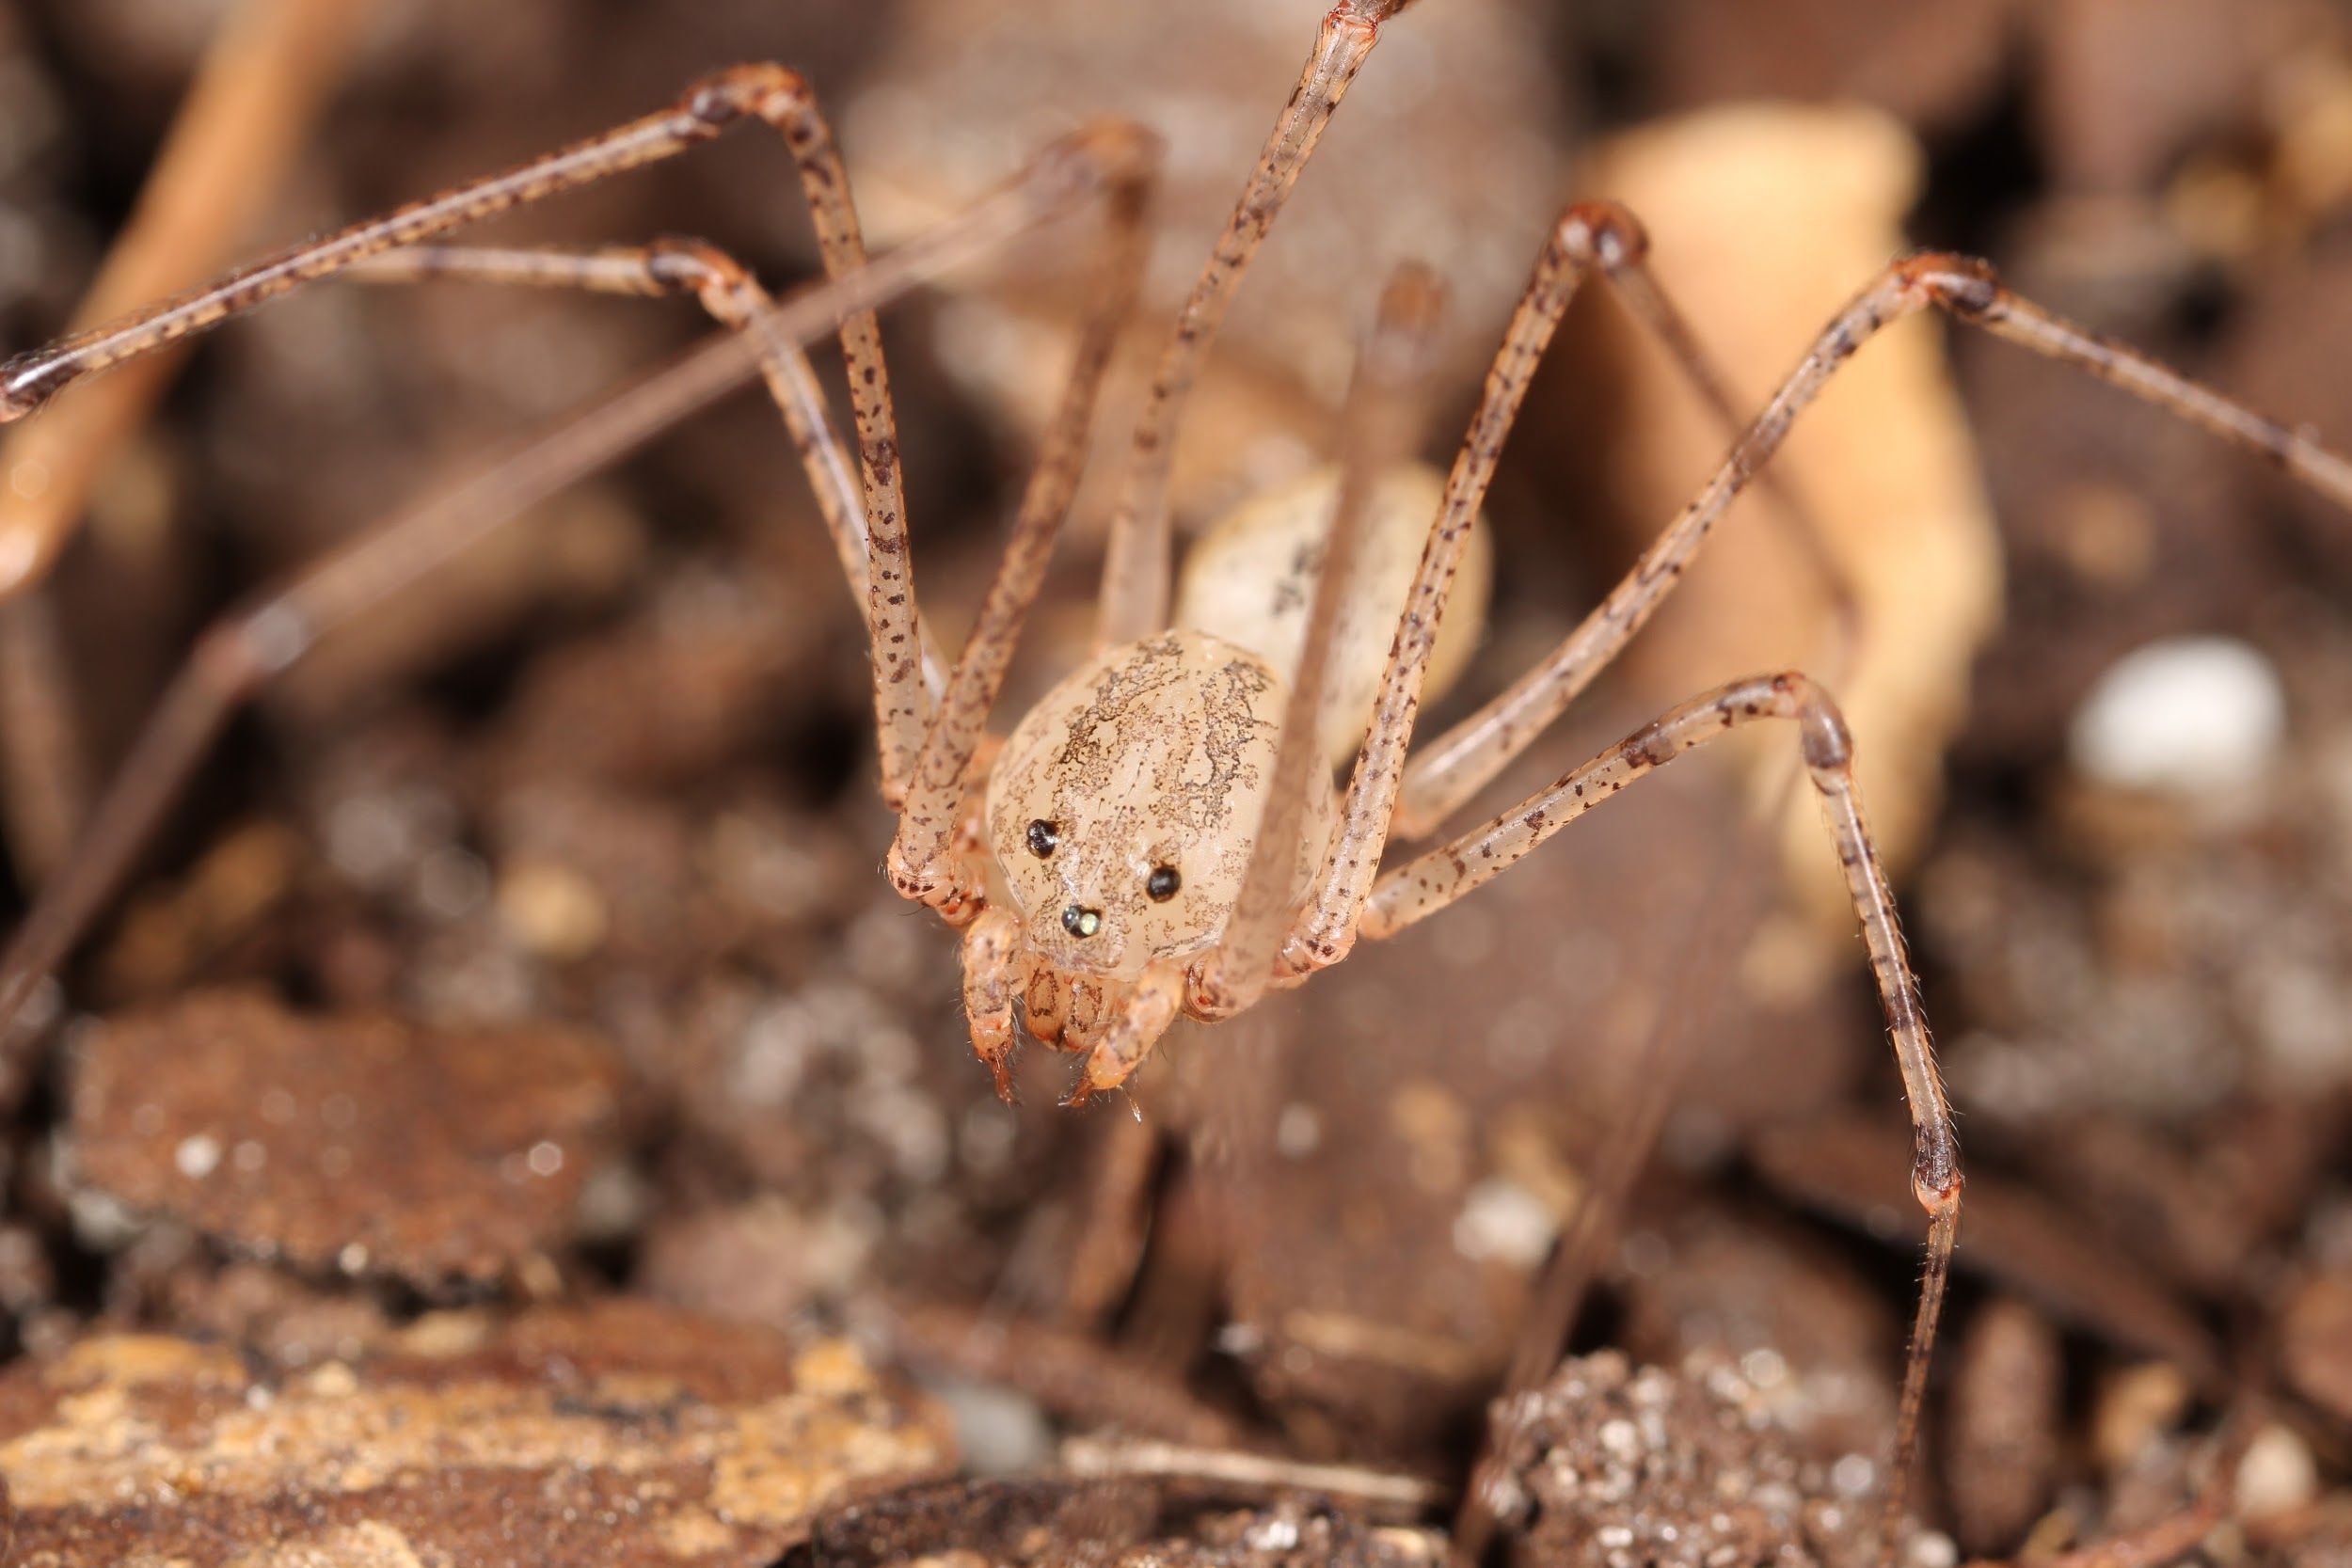 Spitting spiders (Scytodes sp.) have a distinctive arrangement of only six eyes (arranged in three pairs). 